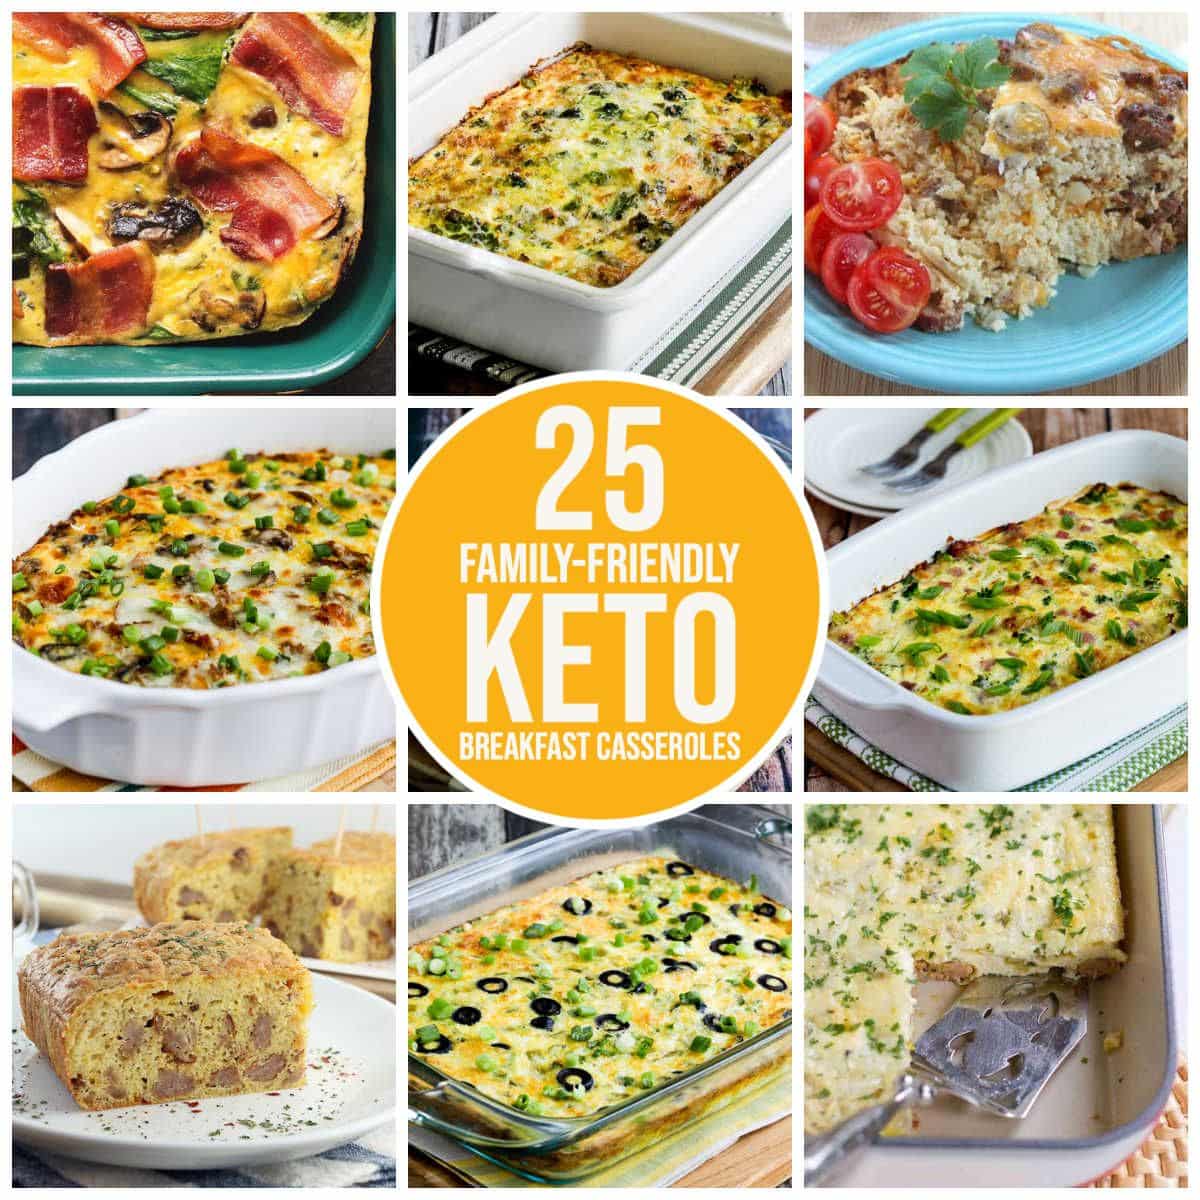 Collage of 25 family-friendly keto breakfast casseroles featured recipes with text overlays